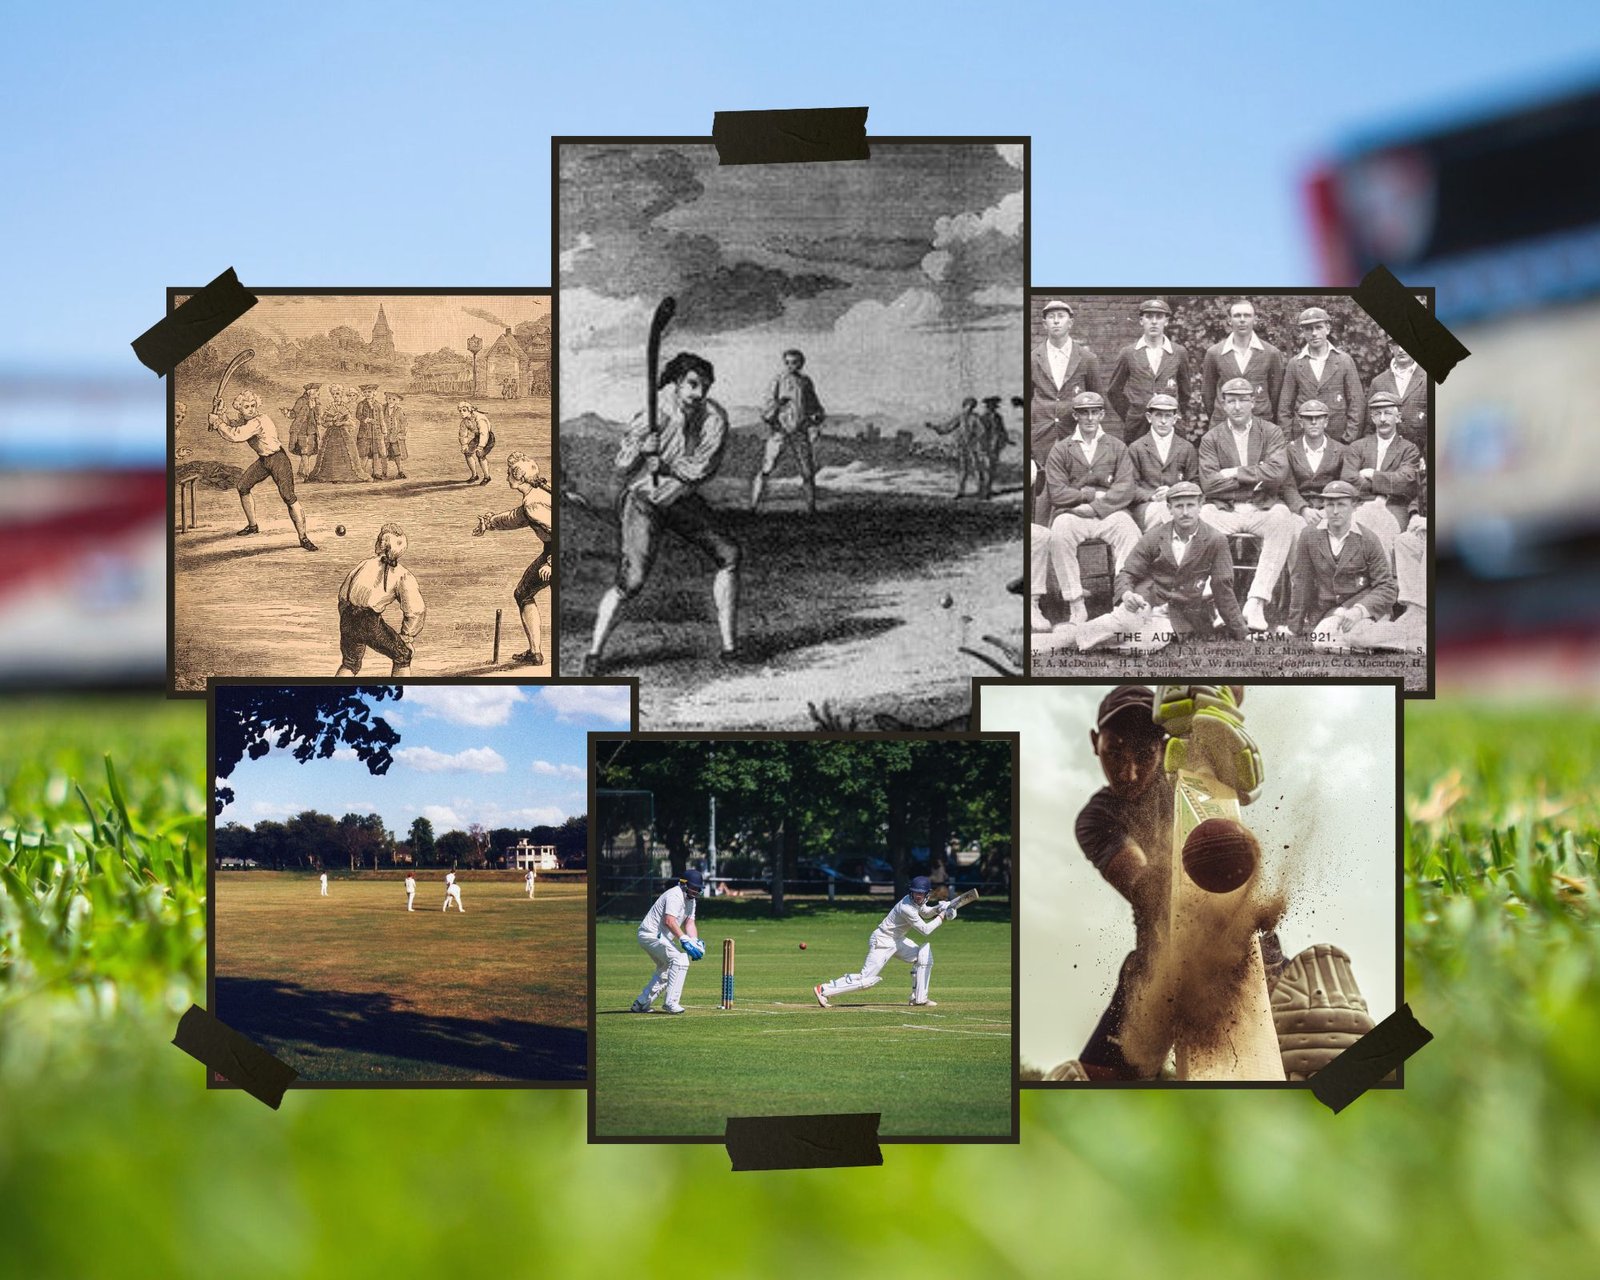 The Evolution of Cricket as an Entertainment